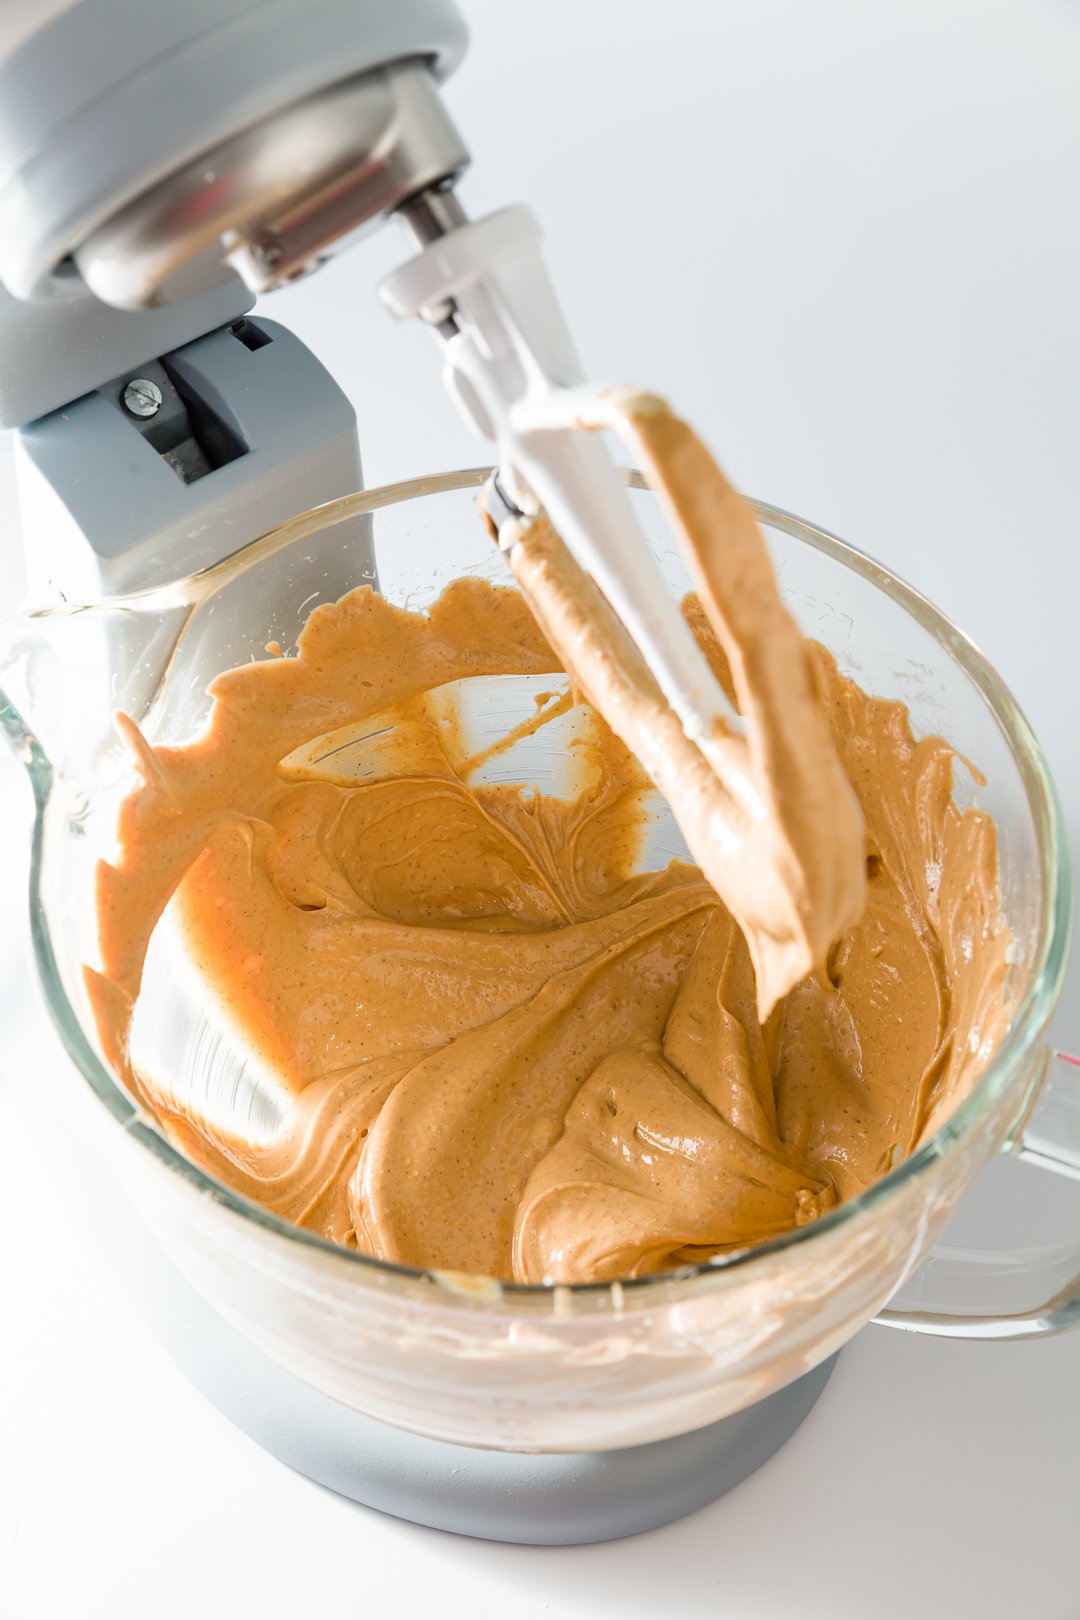 Adding peanut butter and salt to peanut butter frosting